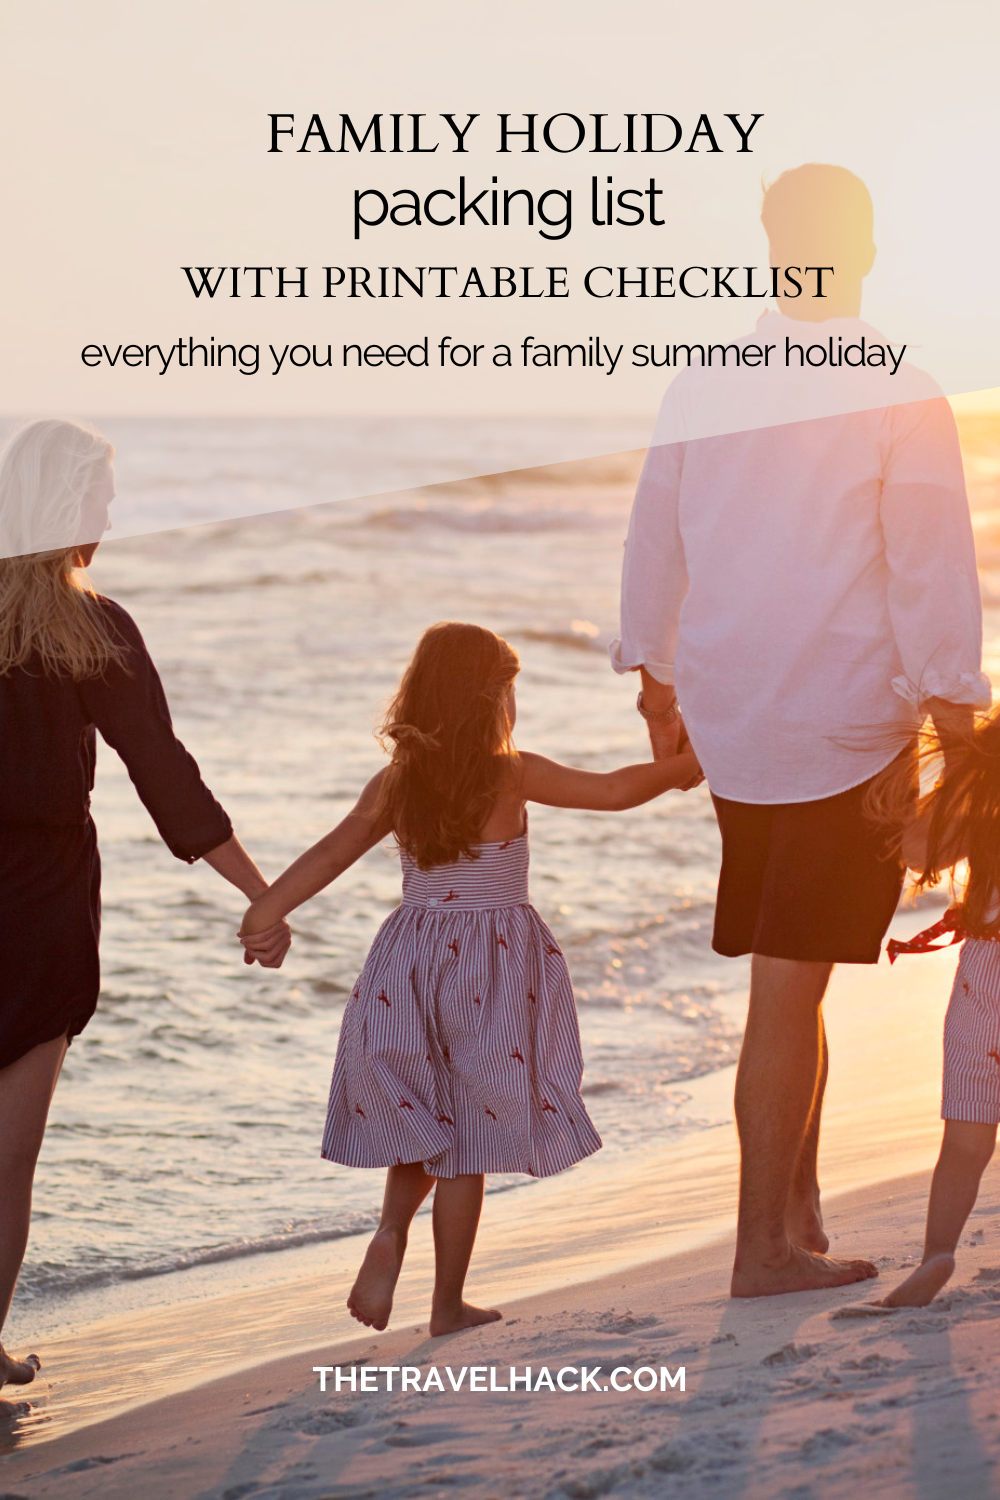 Your family holiday packing list with printable holiday checklist